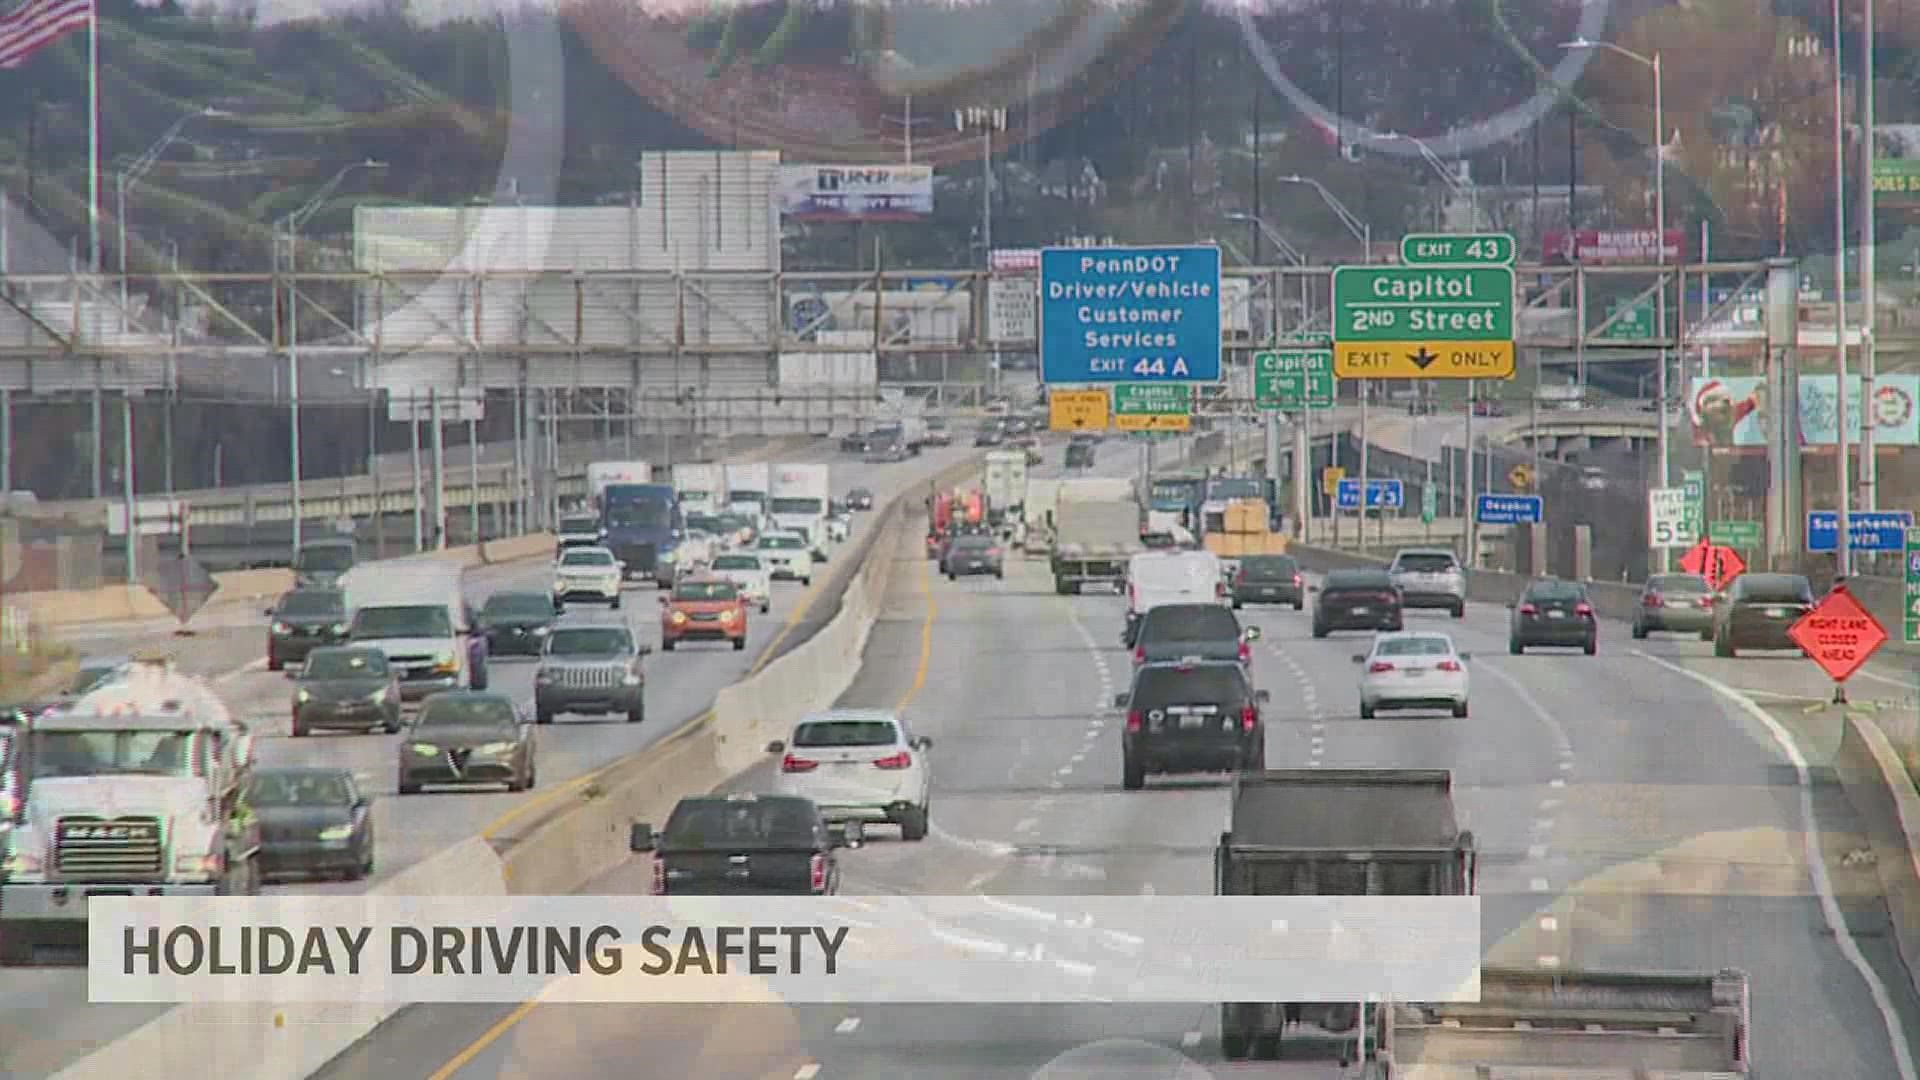 Increased safety enforcement measures will be in place through Sunday.